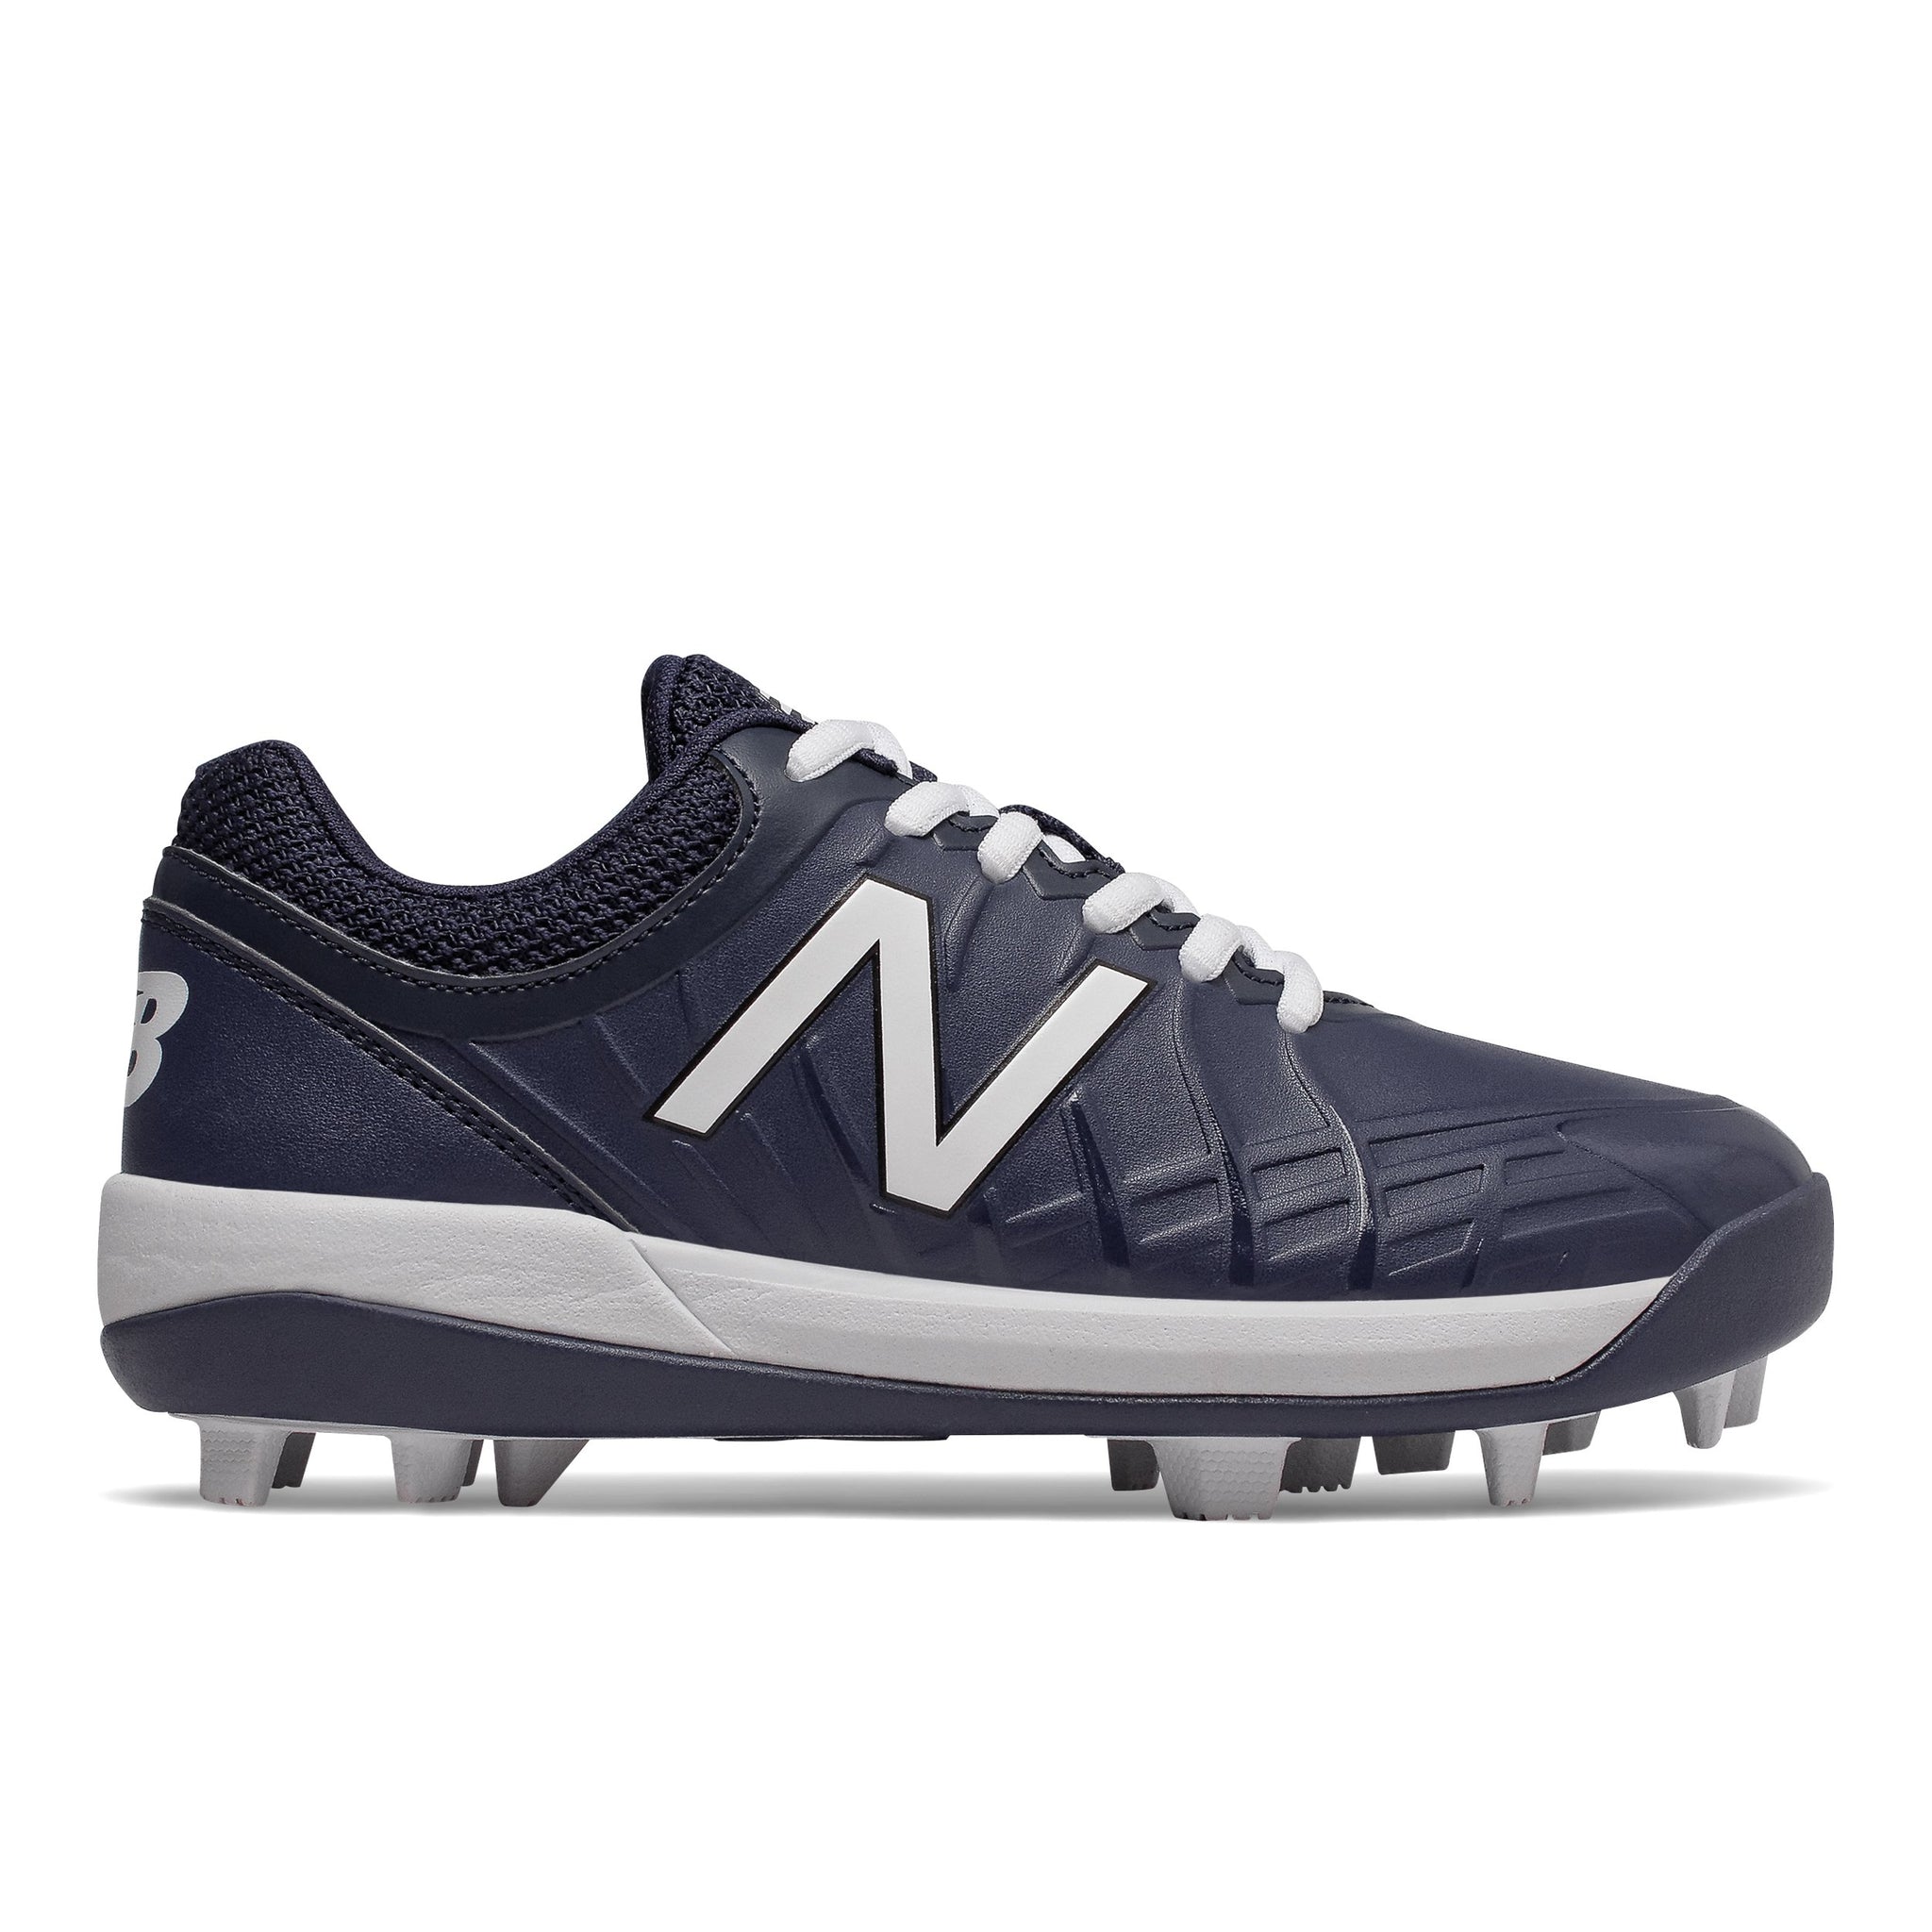 new balance cleats youth